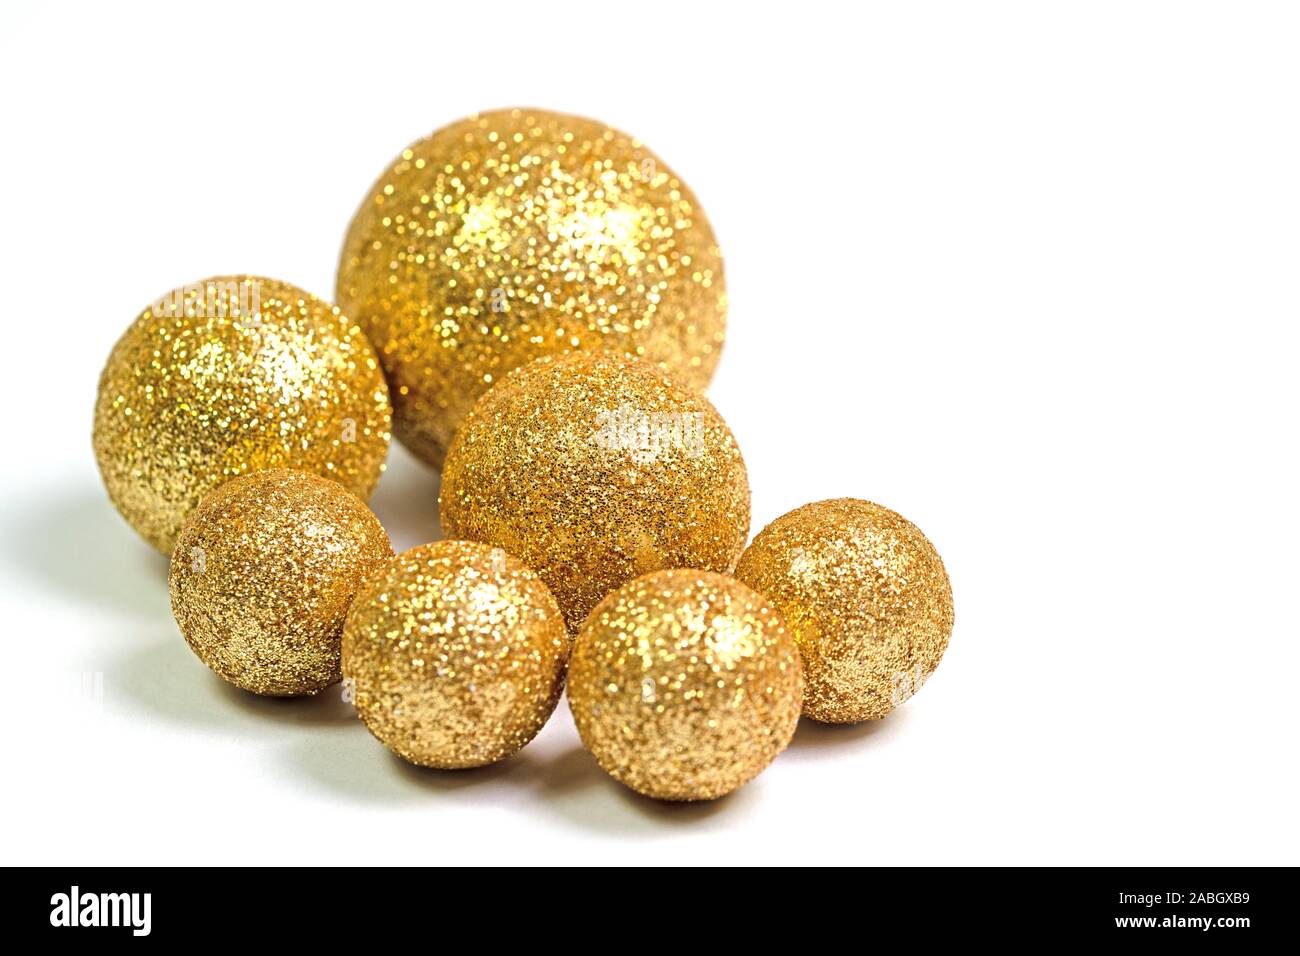 Golden balls in front of white background Stock Photo